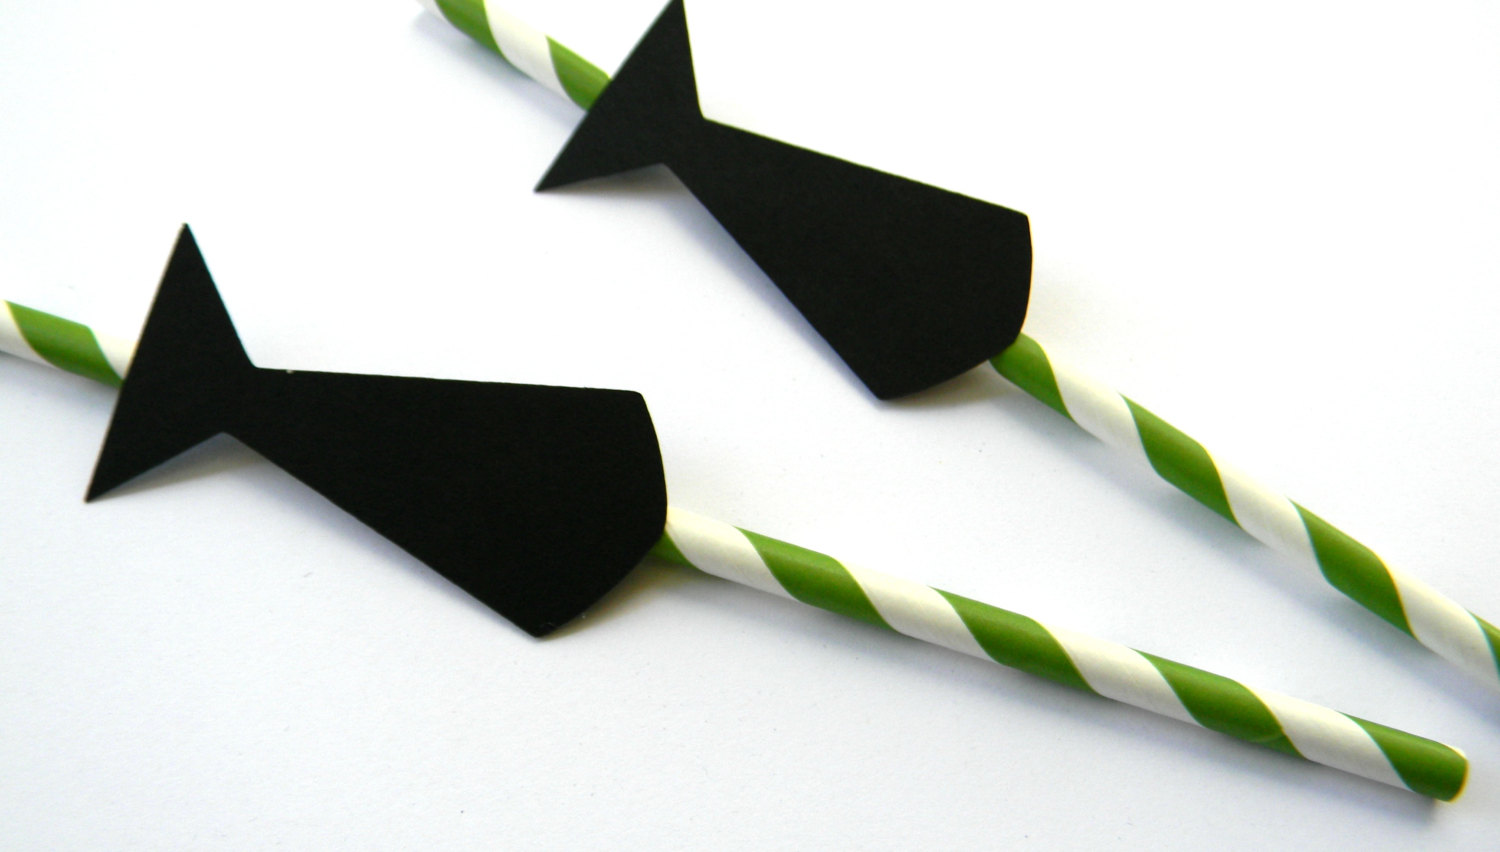 Tie straws for drinks for Father's Day